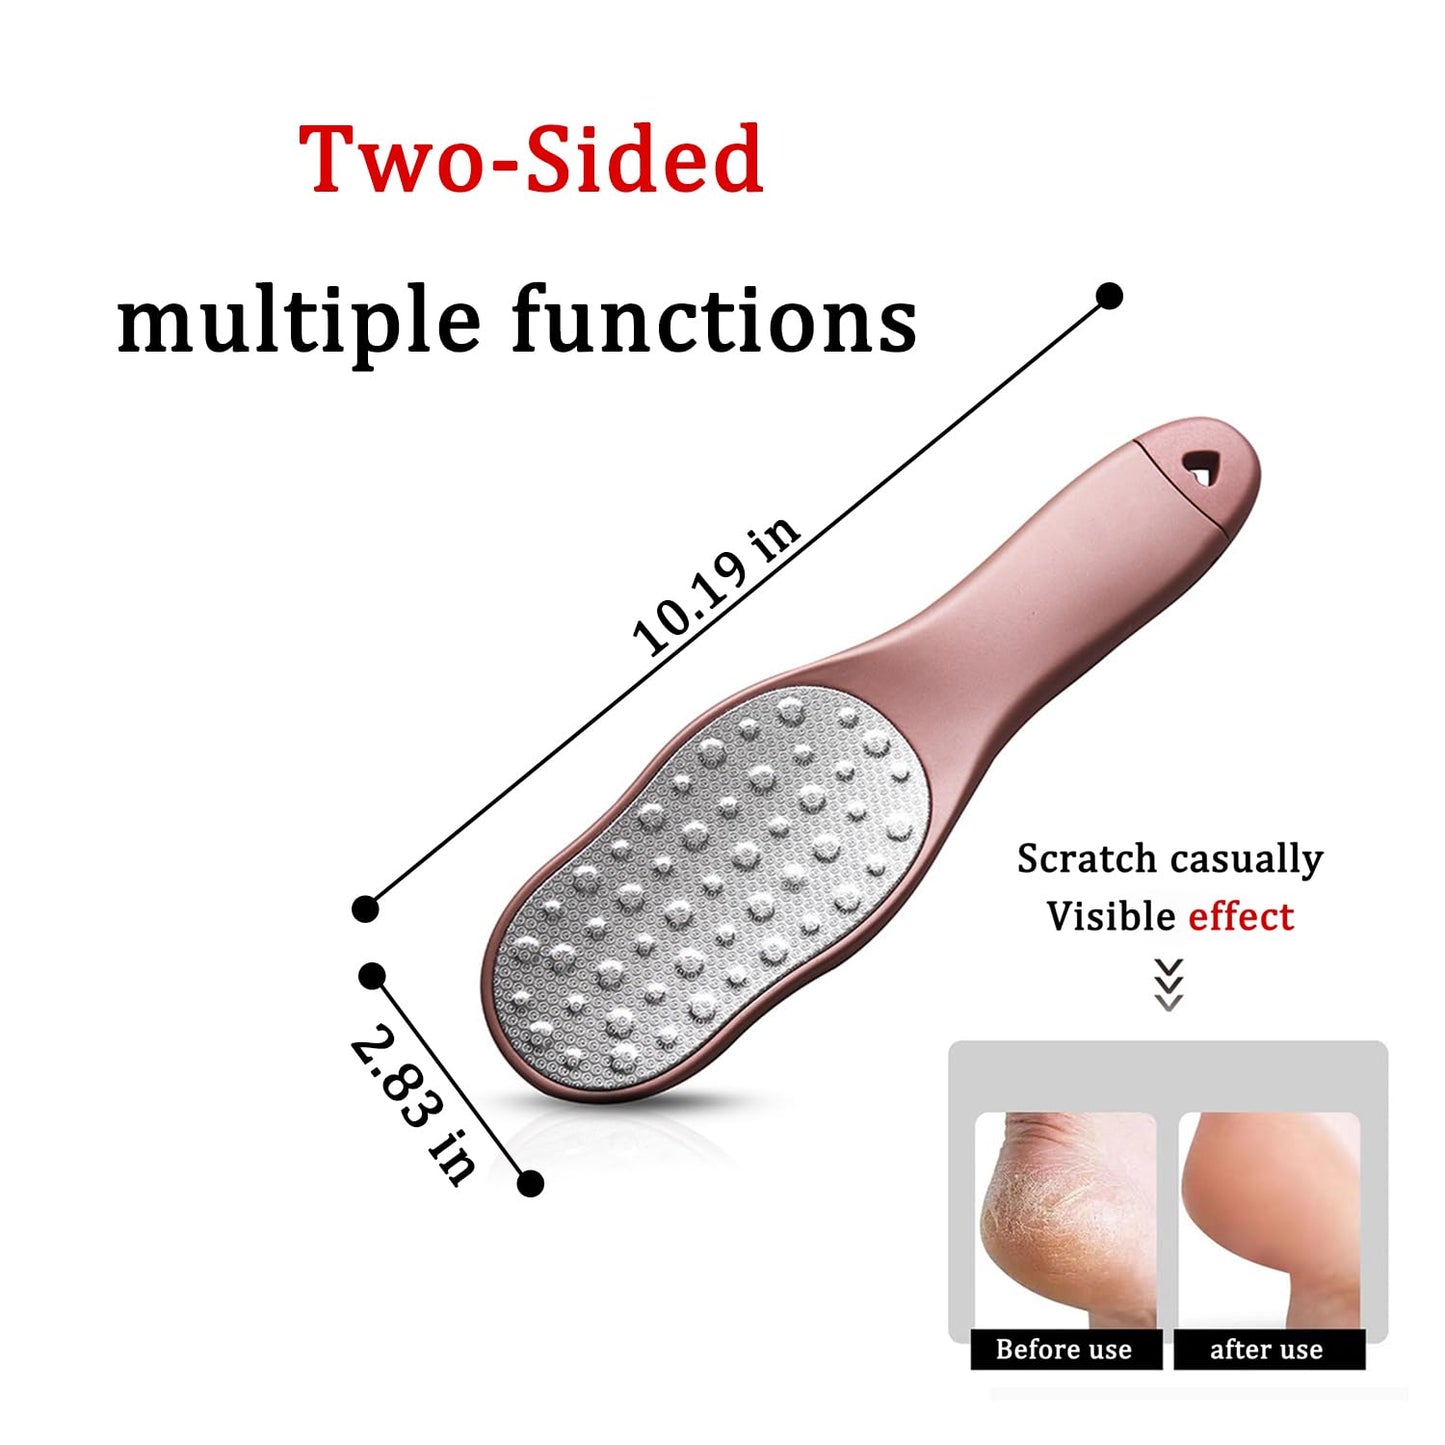 Double Sided Foot File, calluses Remover, Foot Cleaner, Stainless Steel calluses Remover, Foot Rasp Scrubber for Wet Or Dry Skin